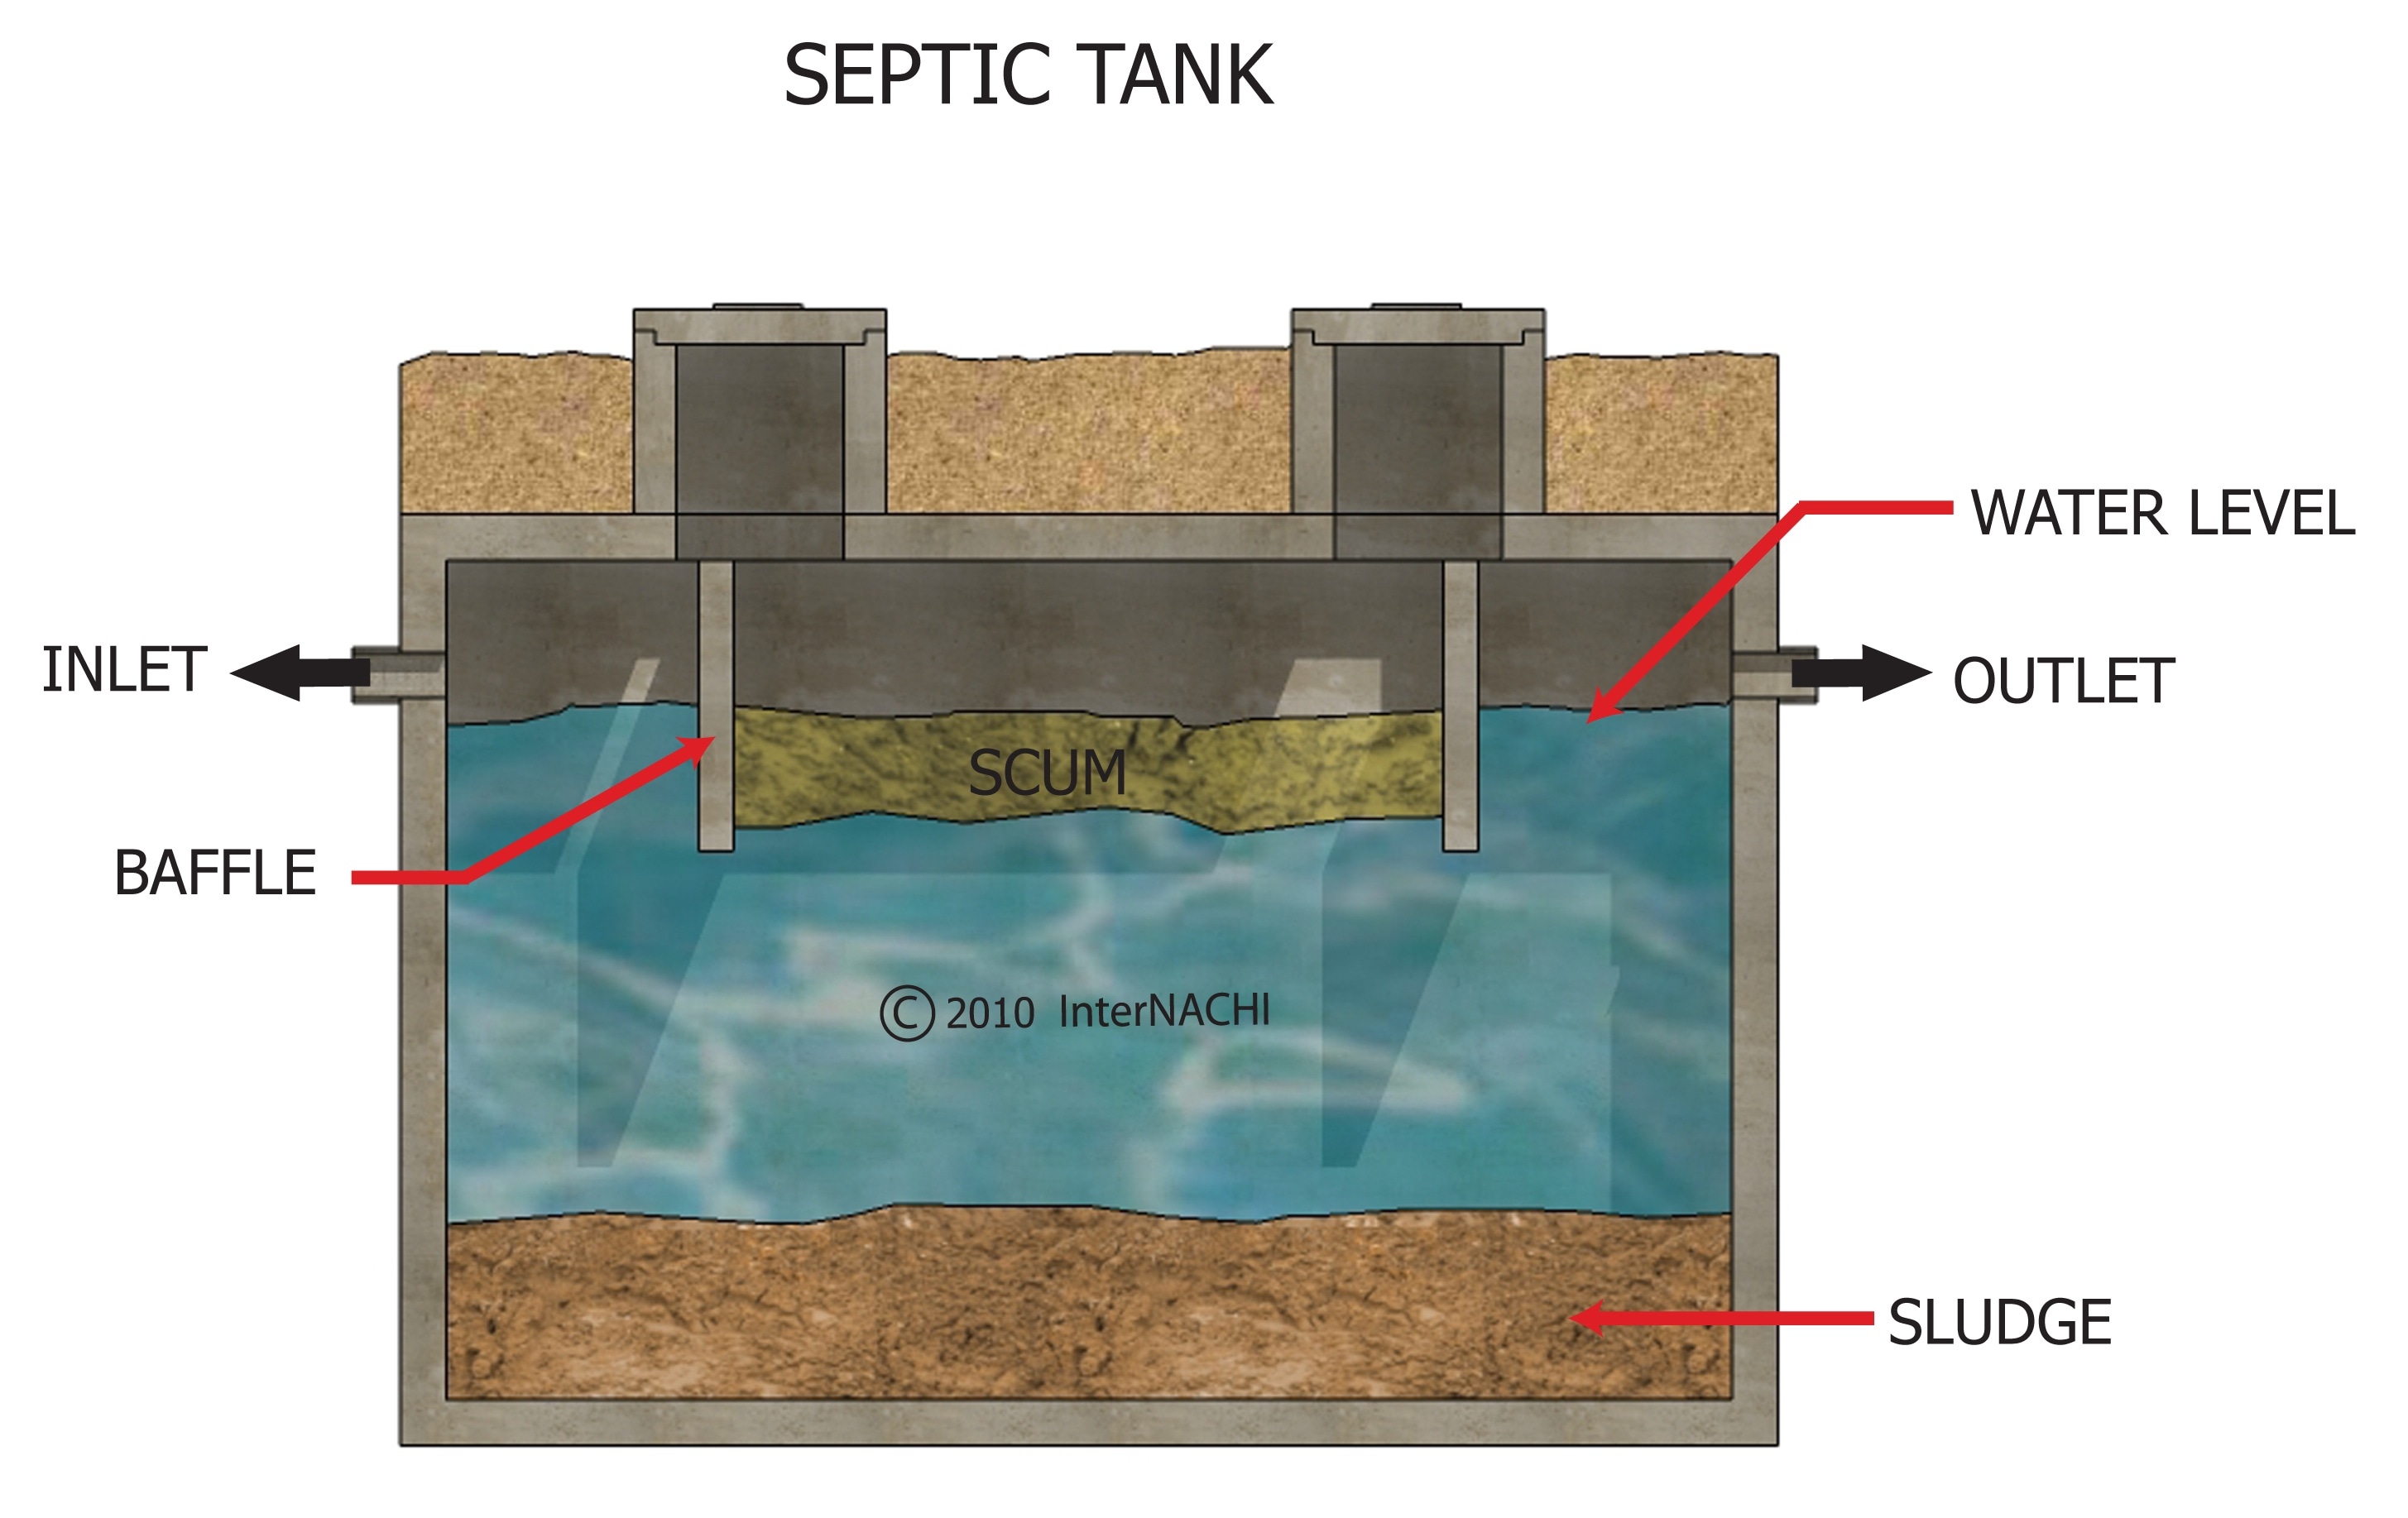 How to find septic tank on property